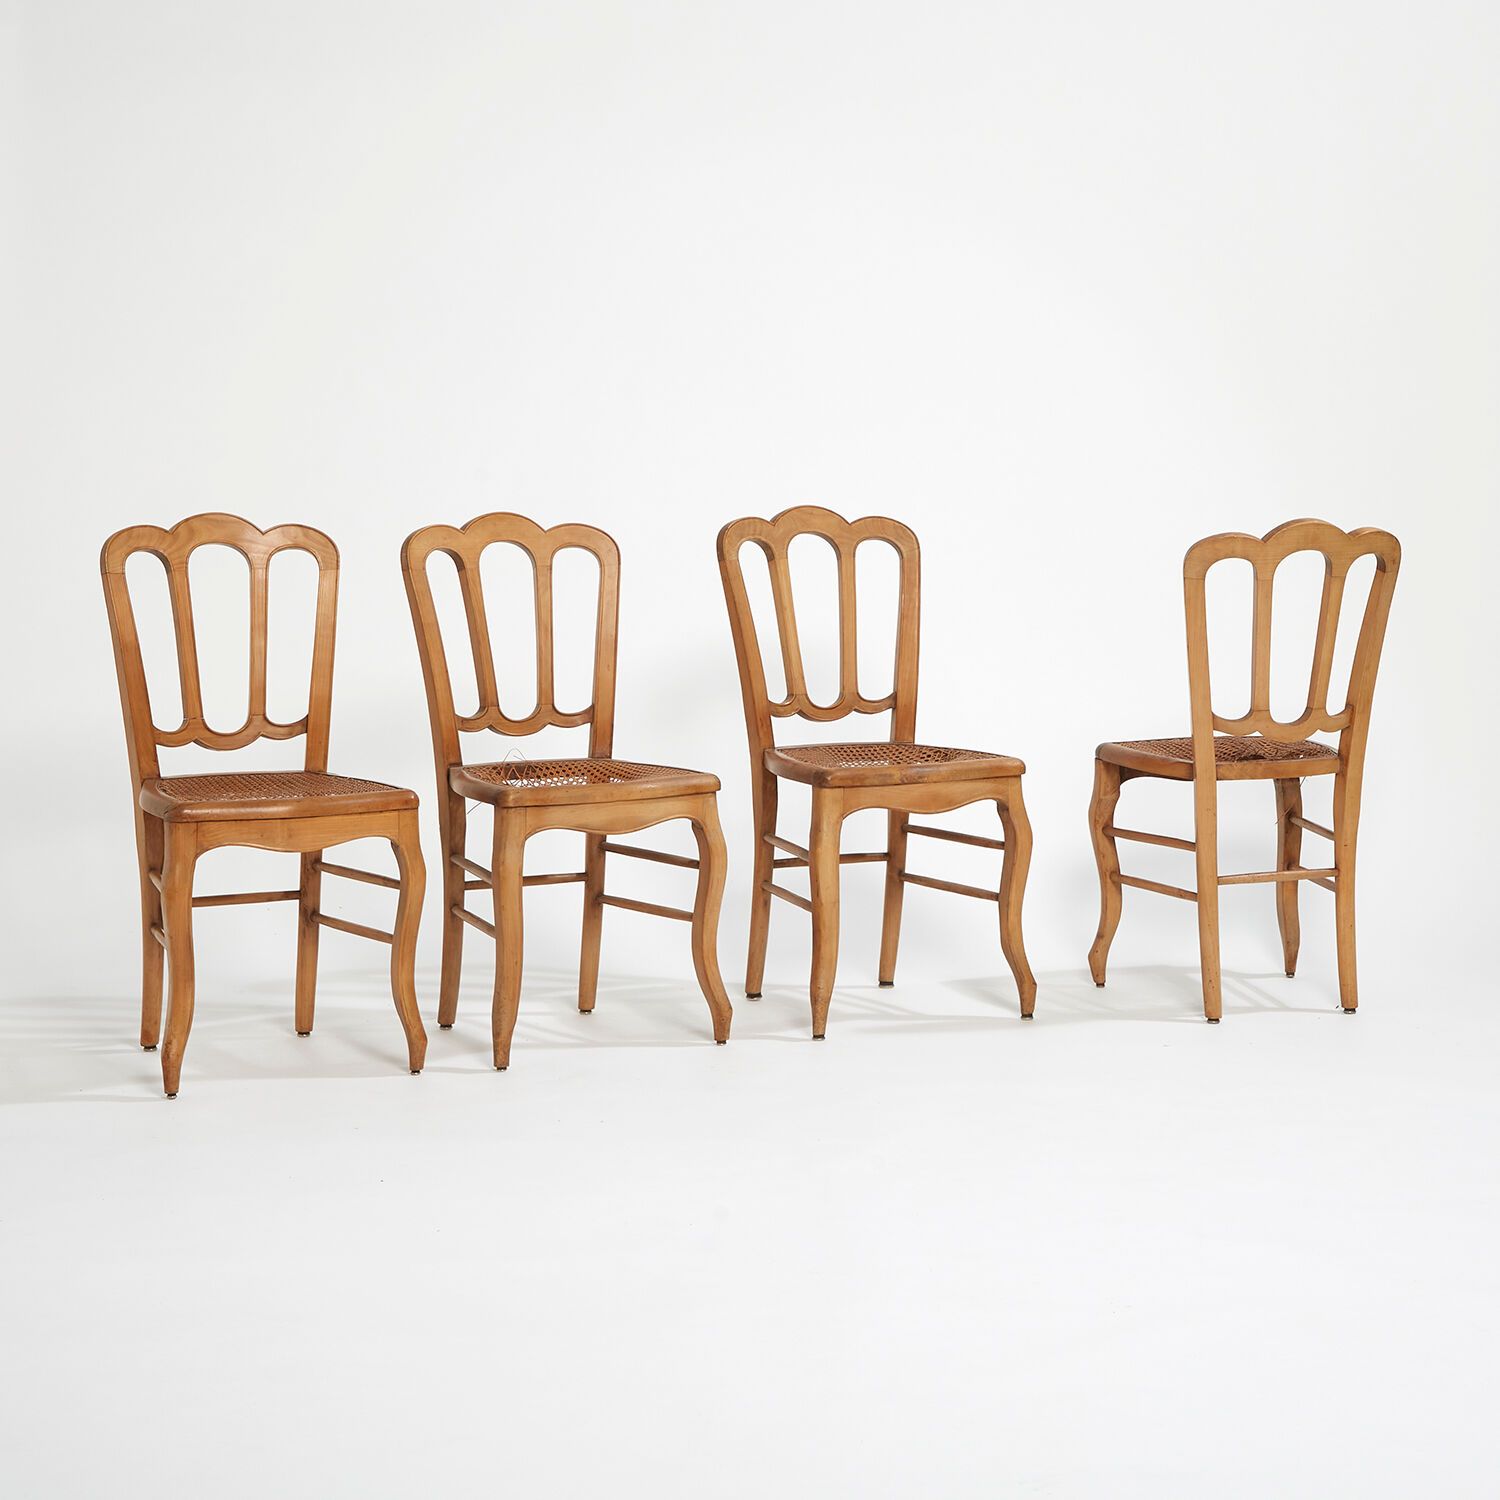 XX SIÈCLE XX CENTURY
Suite of 6 ashwood chairs, cane seats. (seats in poor condi&hellip;